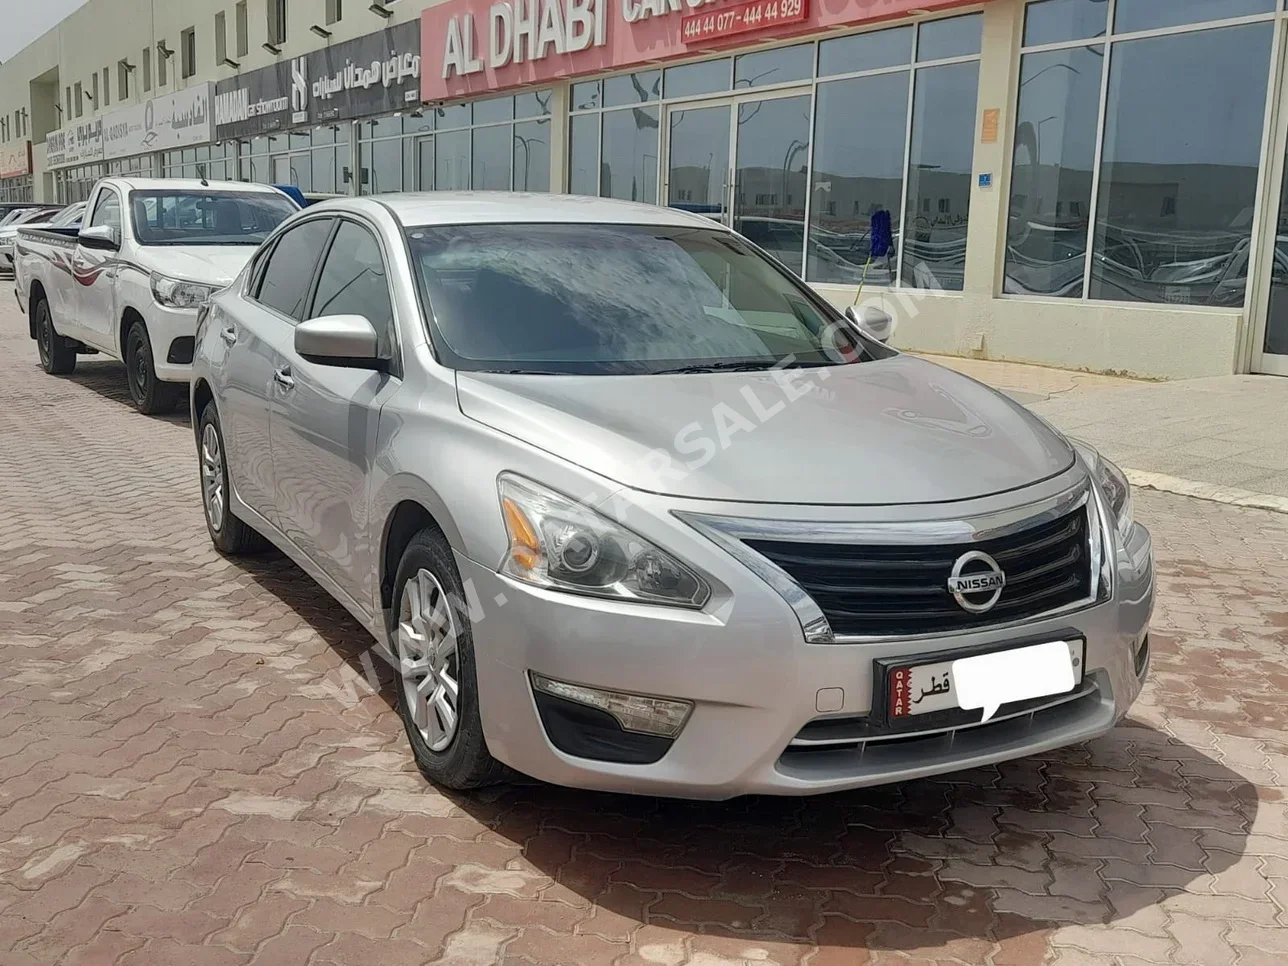 Nissan  Altima  2.5 S  2016  Automatic  84,000 Km  4 Cylinder  Front Wheel Drive (FWD)  Sedan  Silver